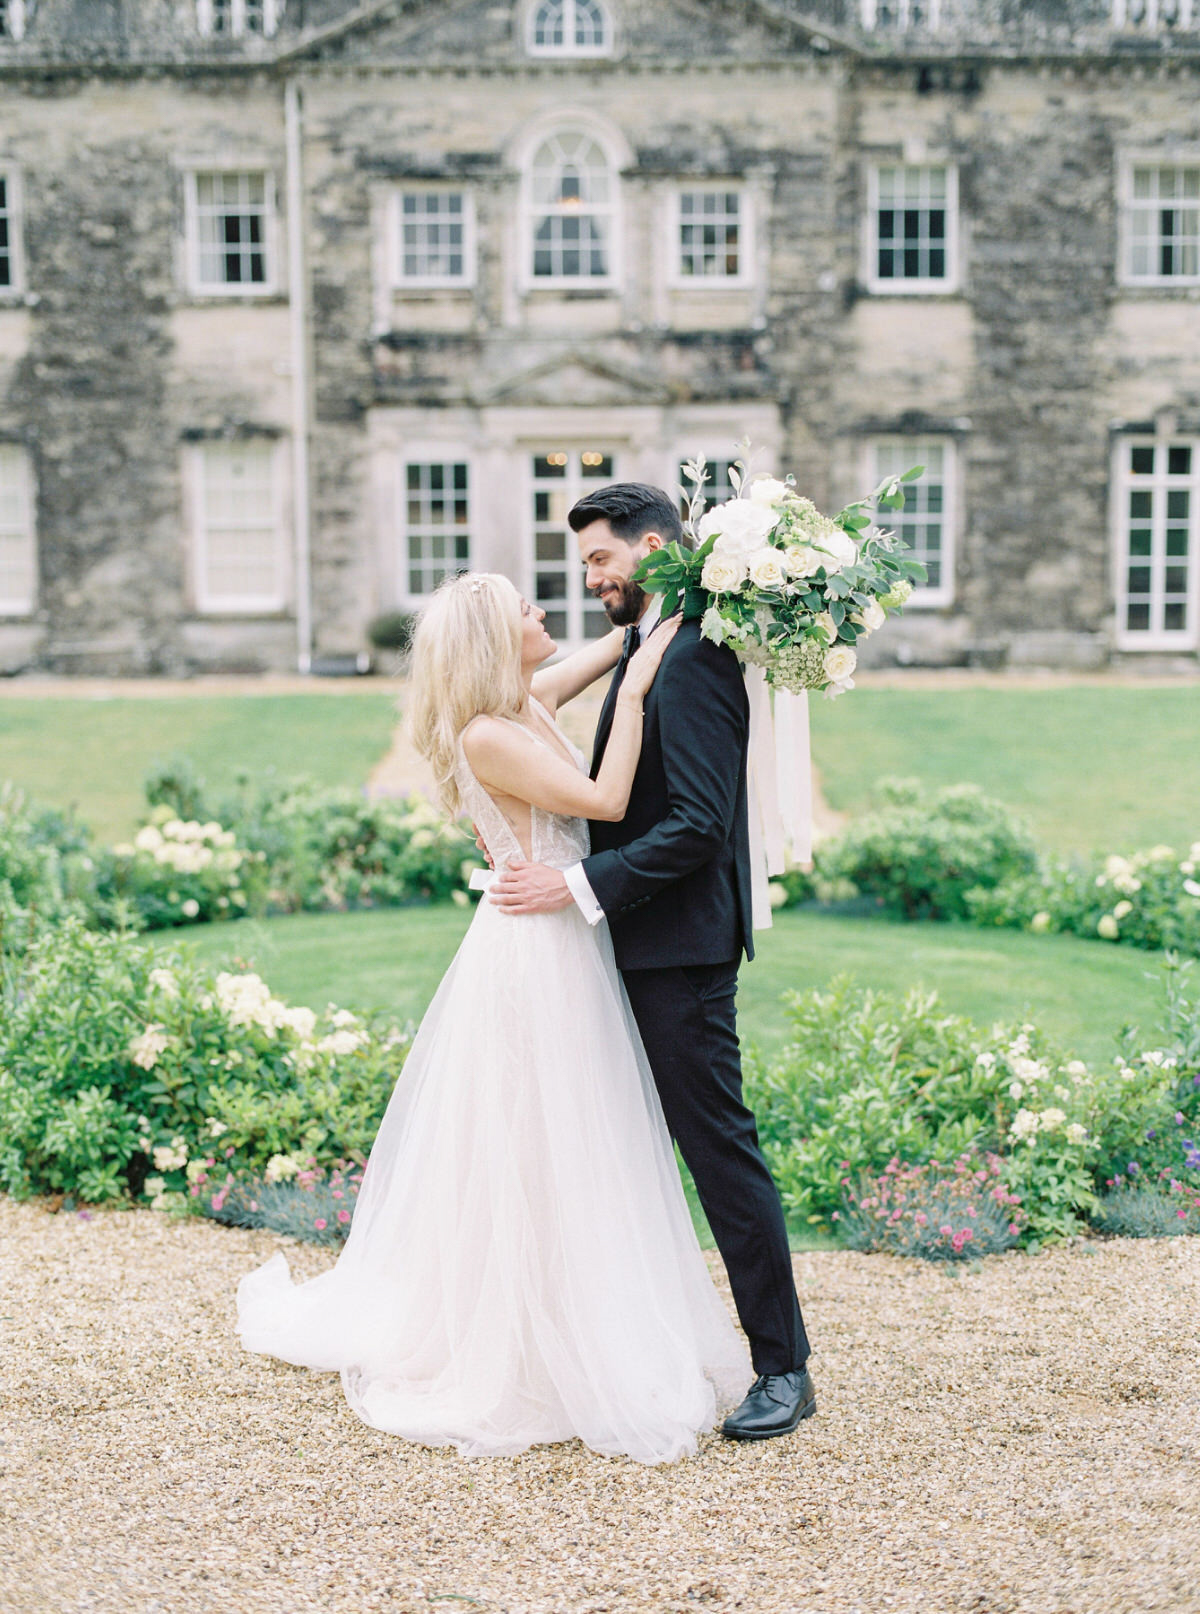 Bride and groom at Came House Dorset Luxury wedding venue